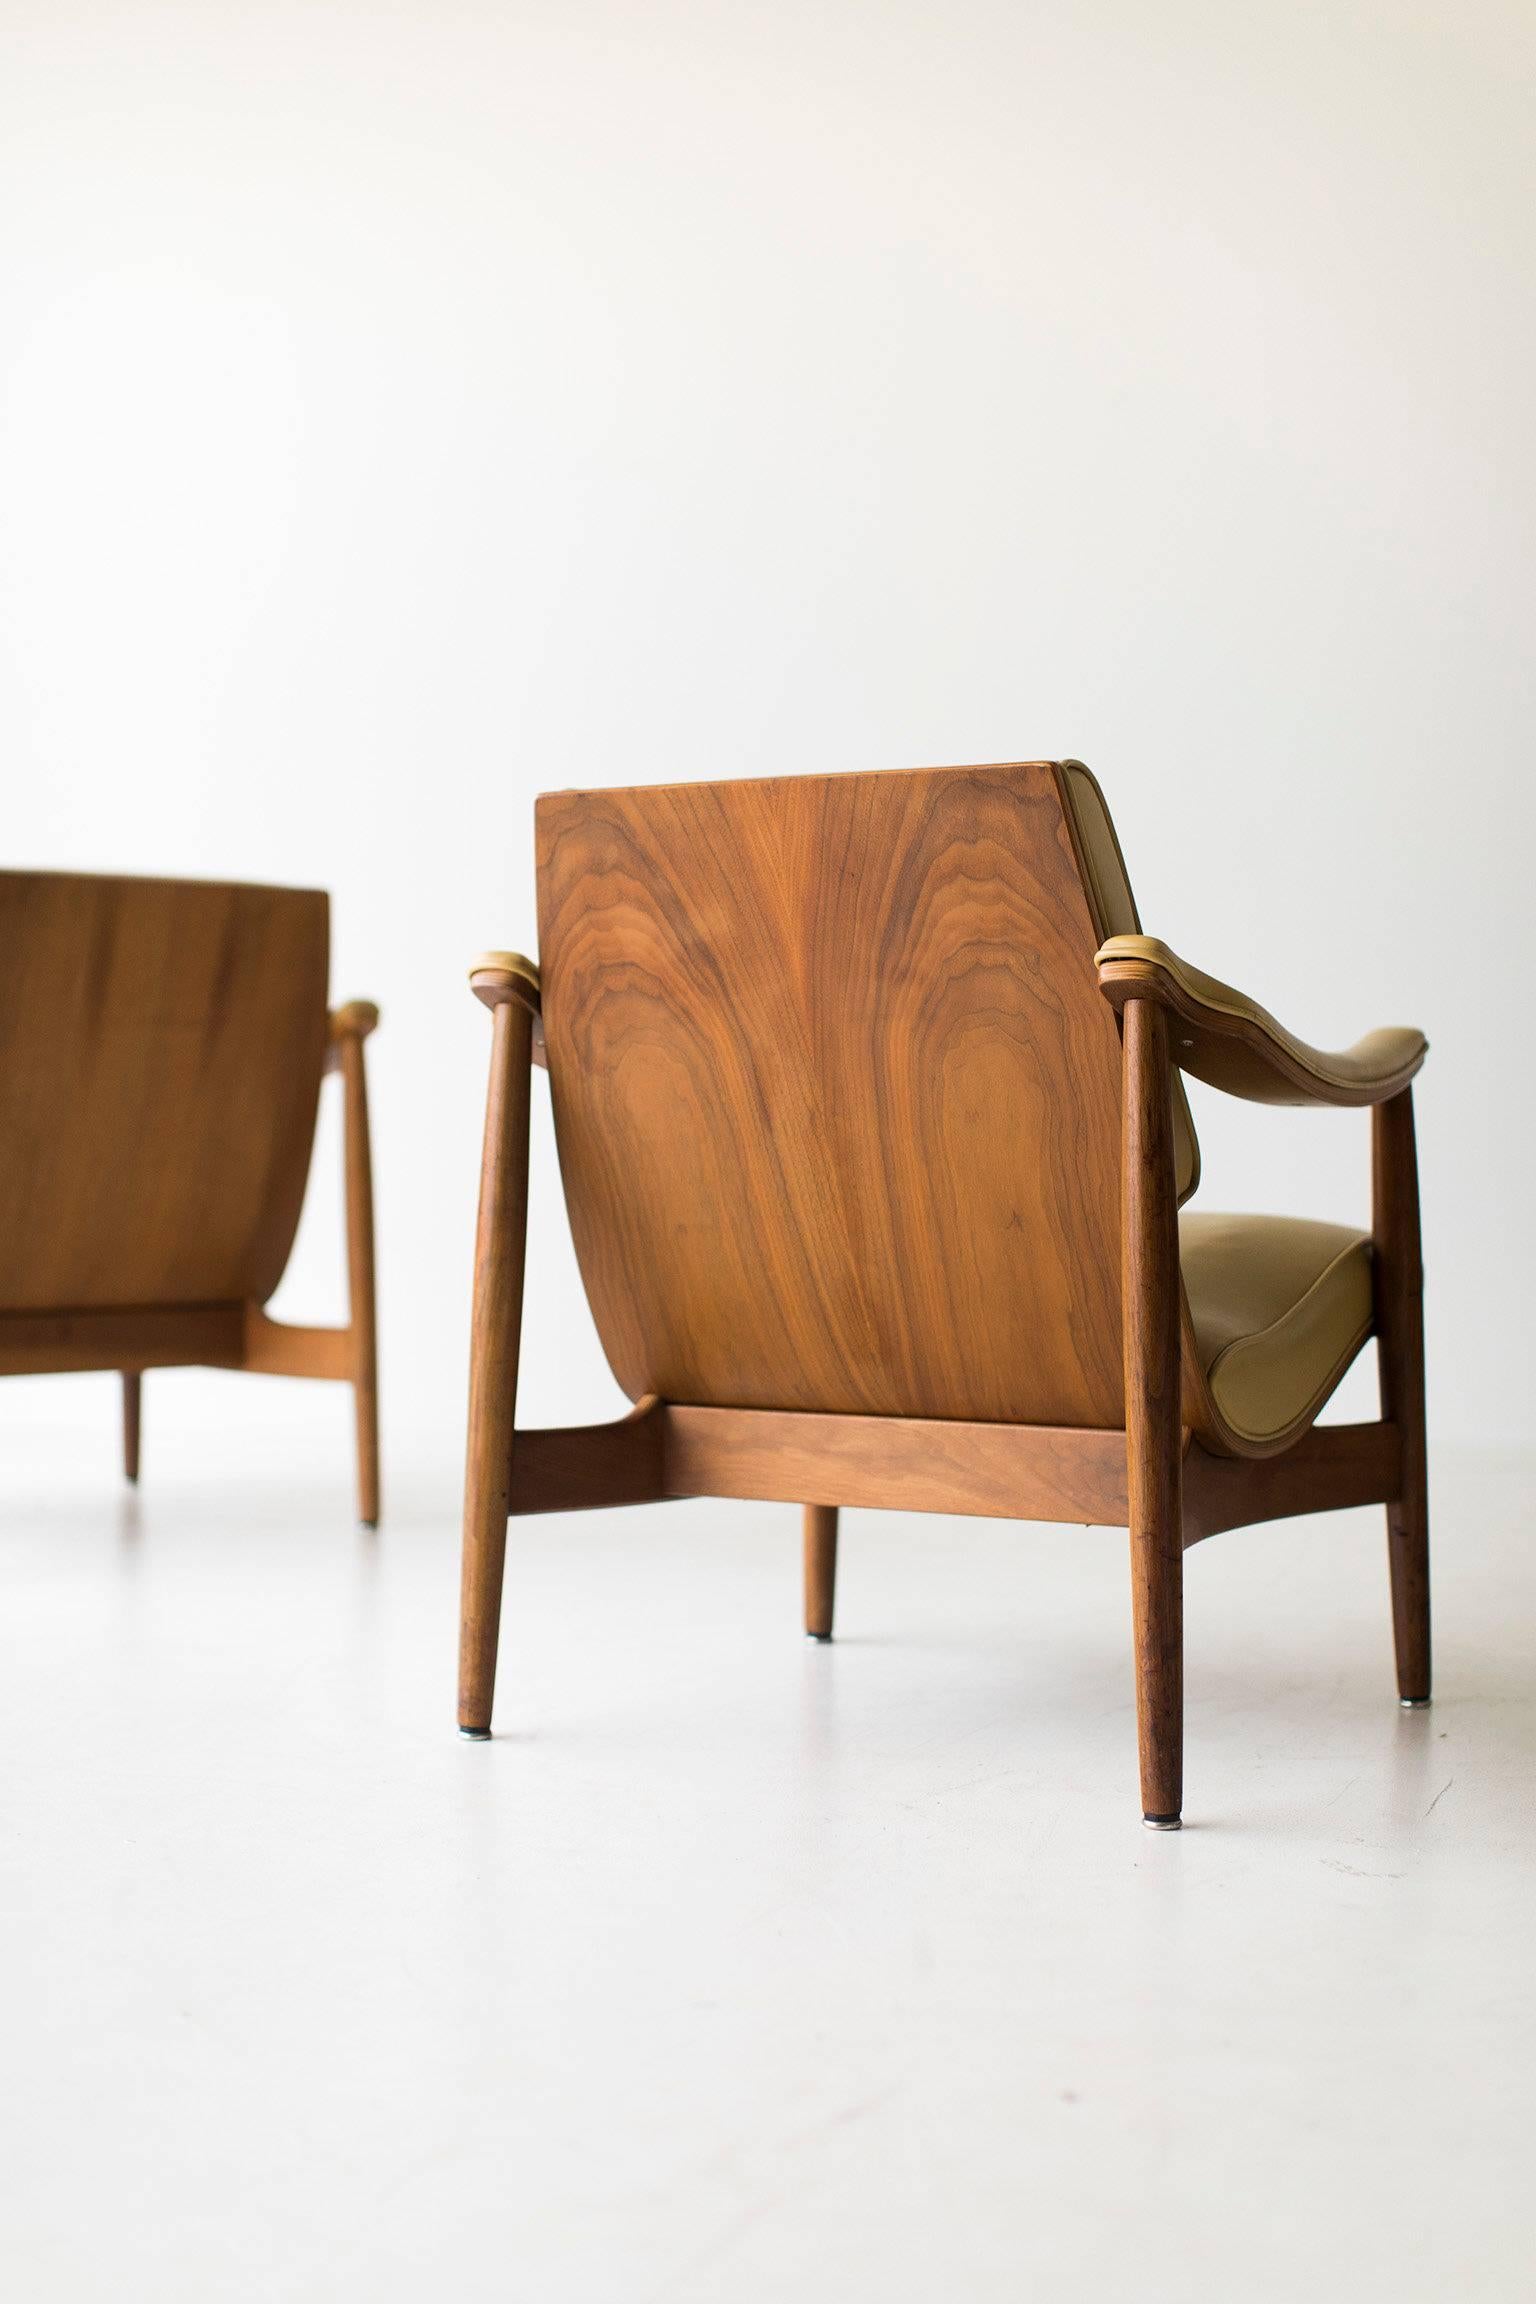 Designer: Unknown. 

Manufacturer: Thonet. 
Period or model: Mid-Century Modern. 
Specs: Walnut, vinyl. 

Condition: 

These modern Thonet lounge chairs are in vintage condition. The wood shows normal wear with age (discoloration, scratches,